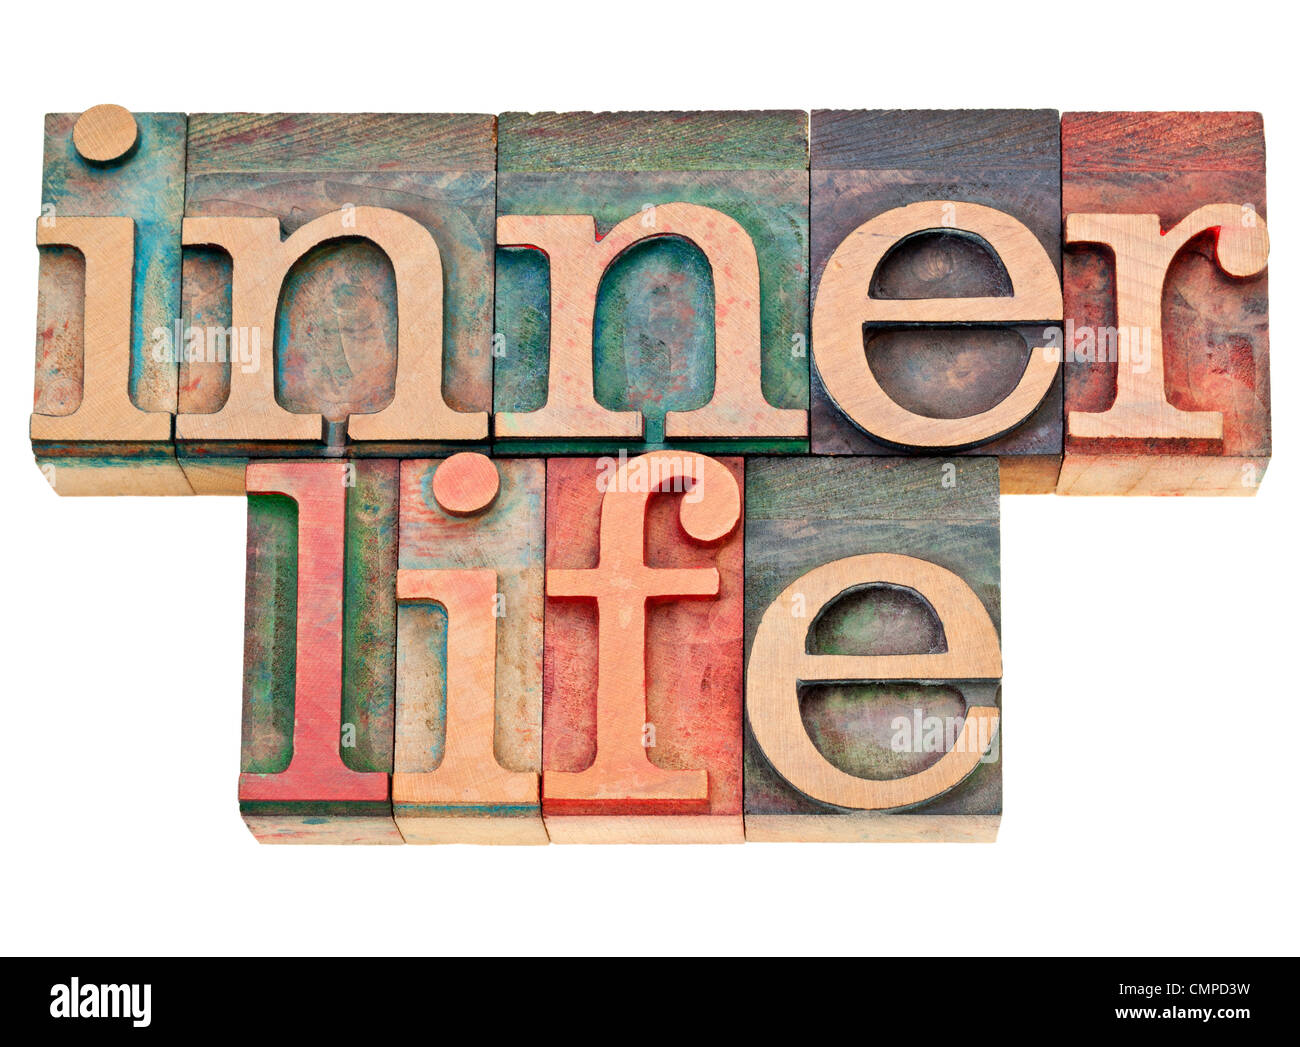 inner life - spirituality concept - isolated text in vintage letterpress wood type Stock Photo